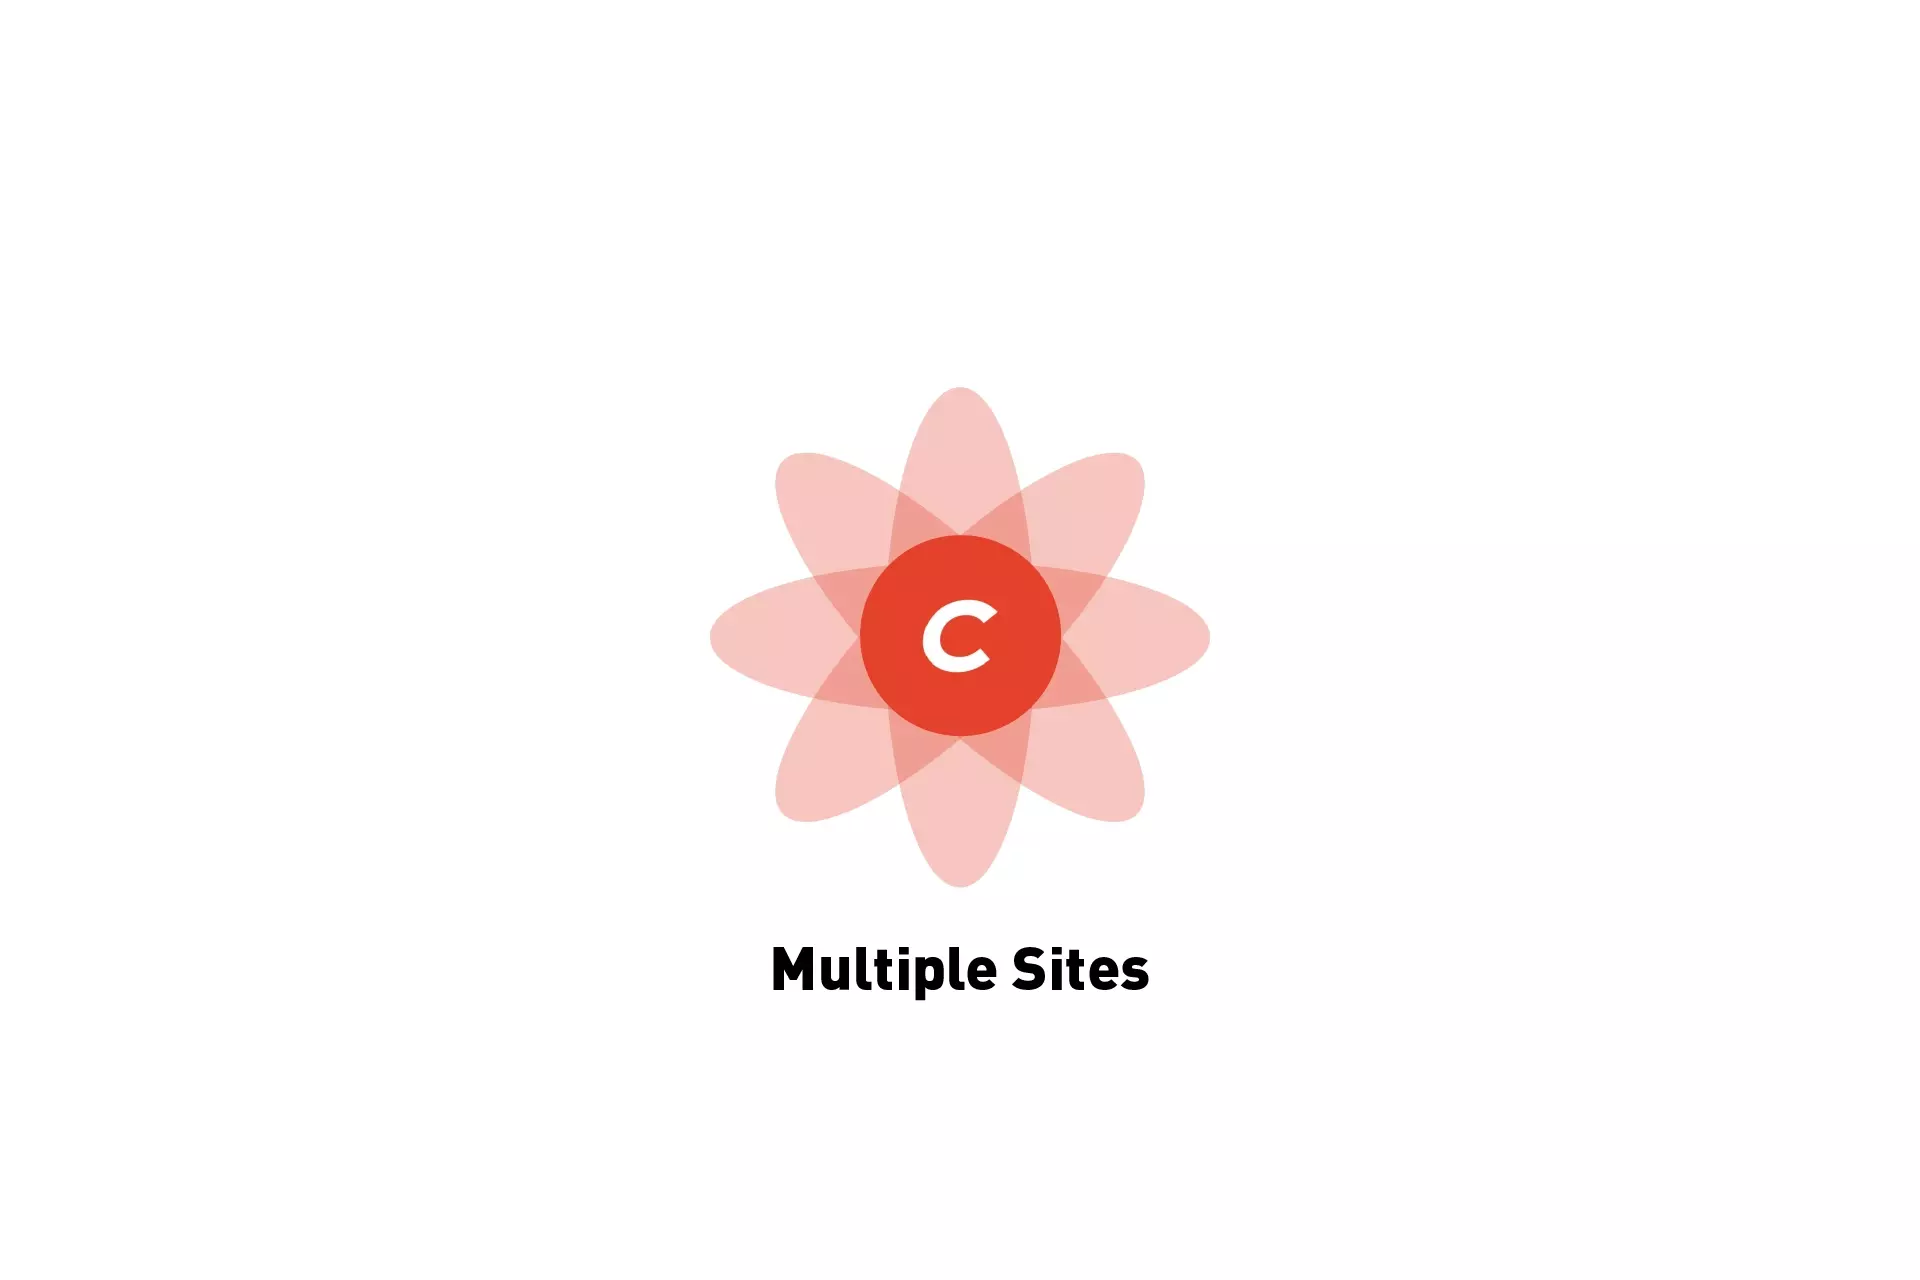 A flower that represents Craft CMS, beneath it sits the text "Multiple Sites."